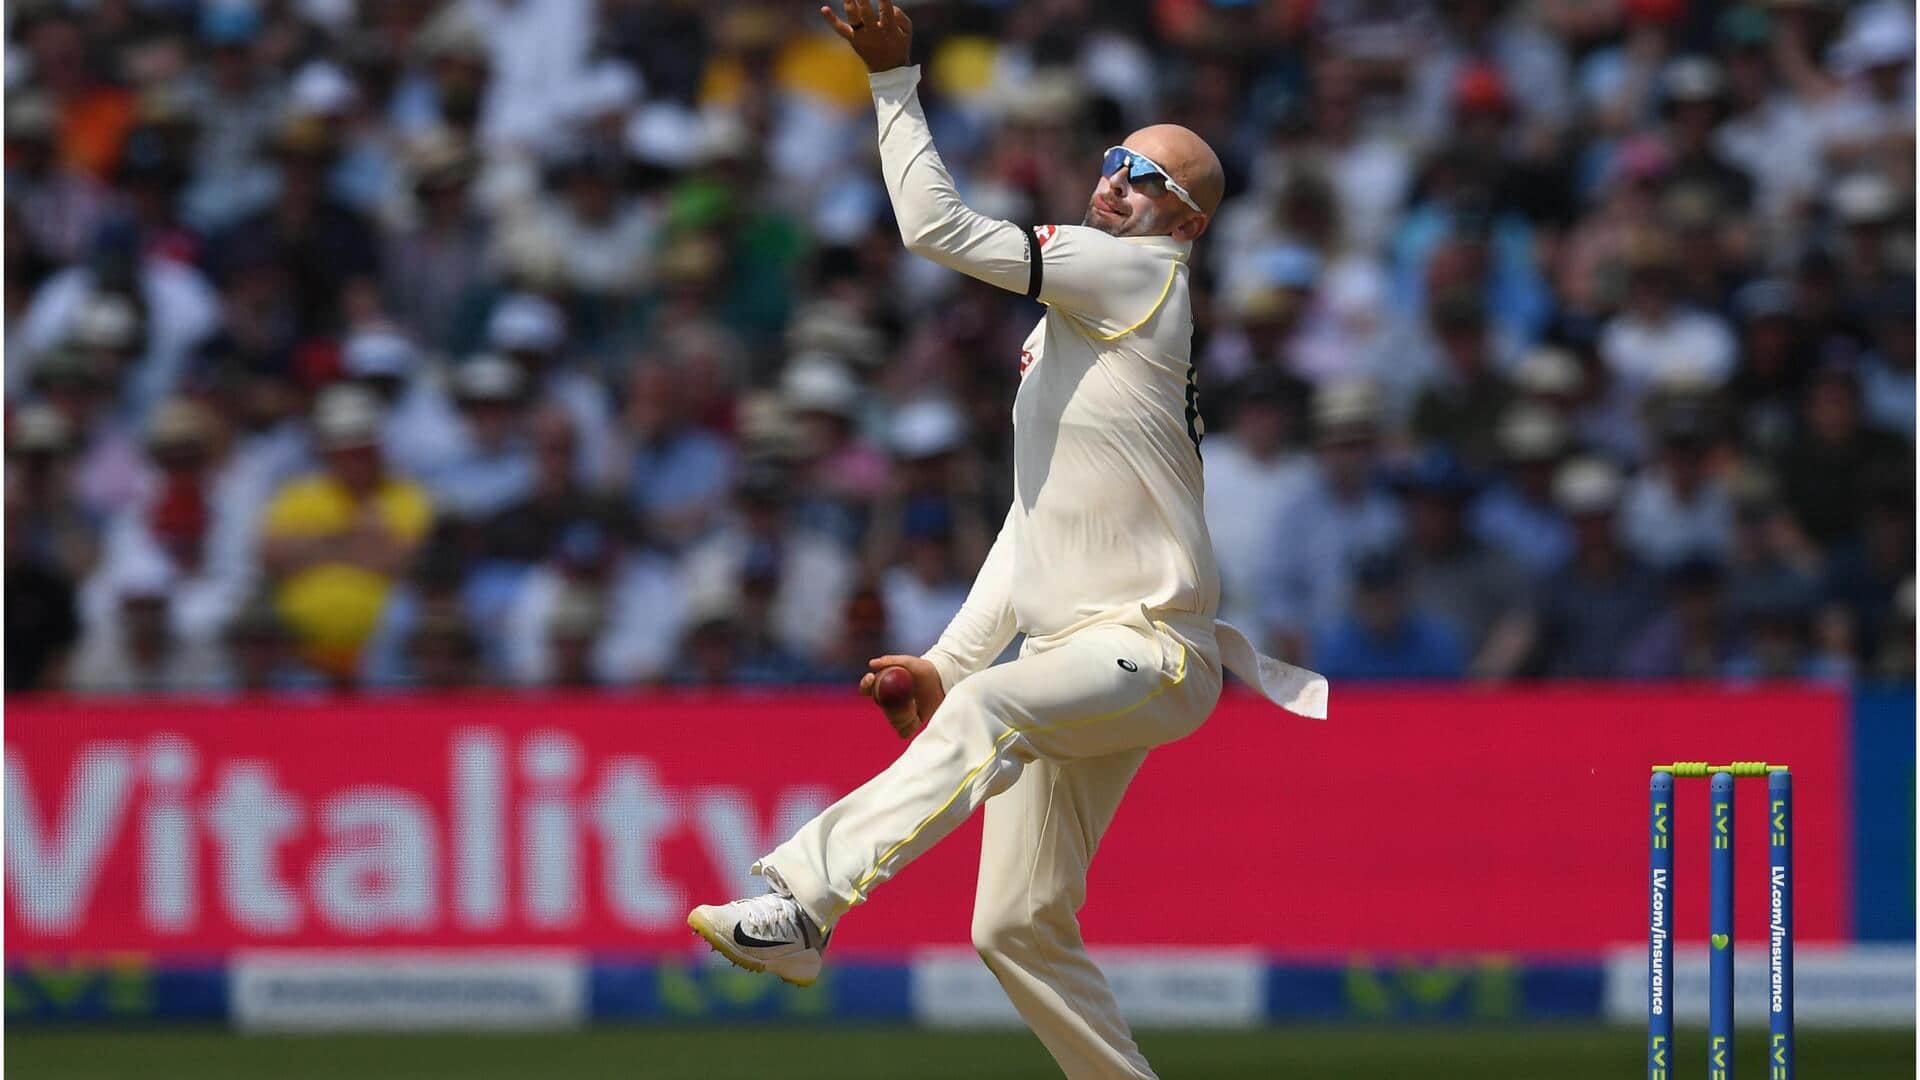 Nathan Lyon becomes second-highest wicket-taker in fourth innings (Tests): Stats